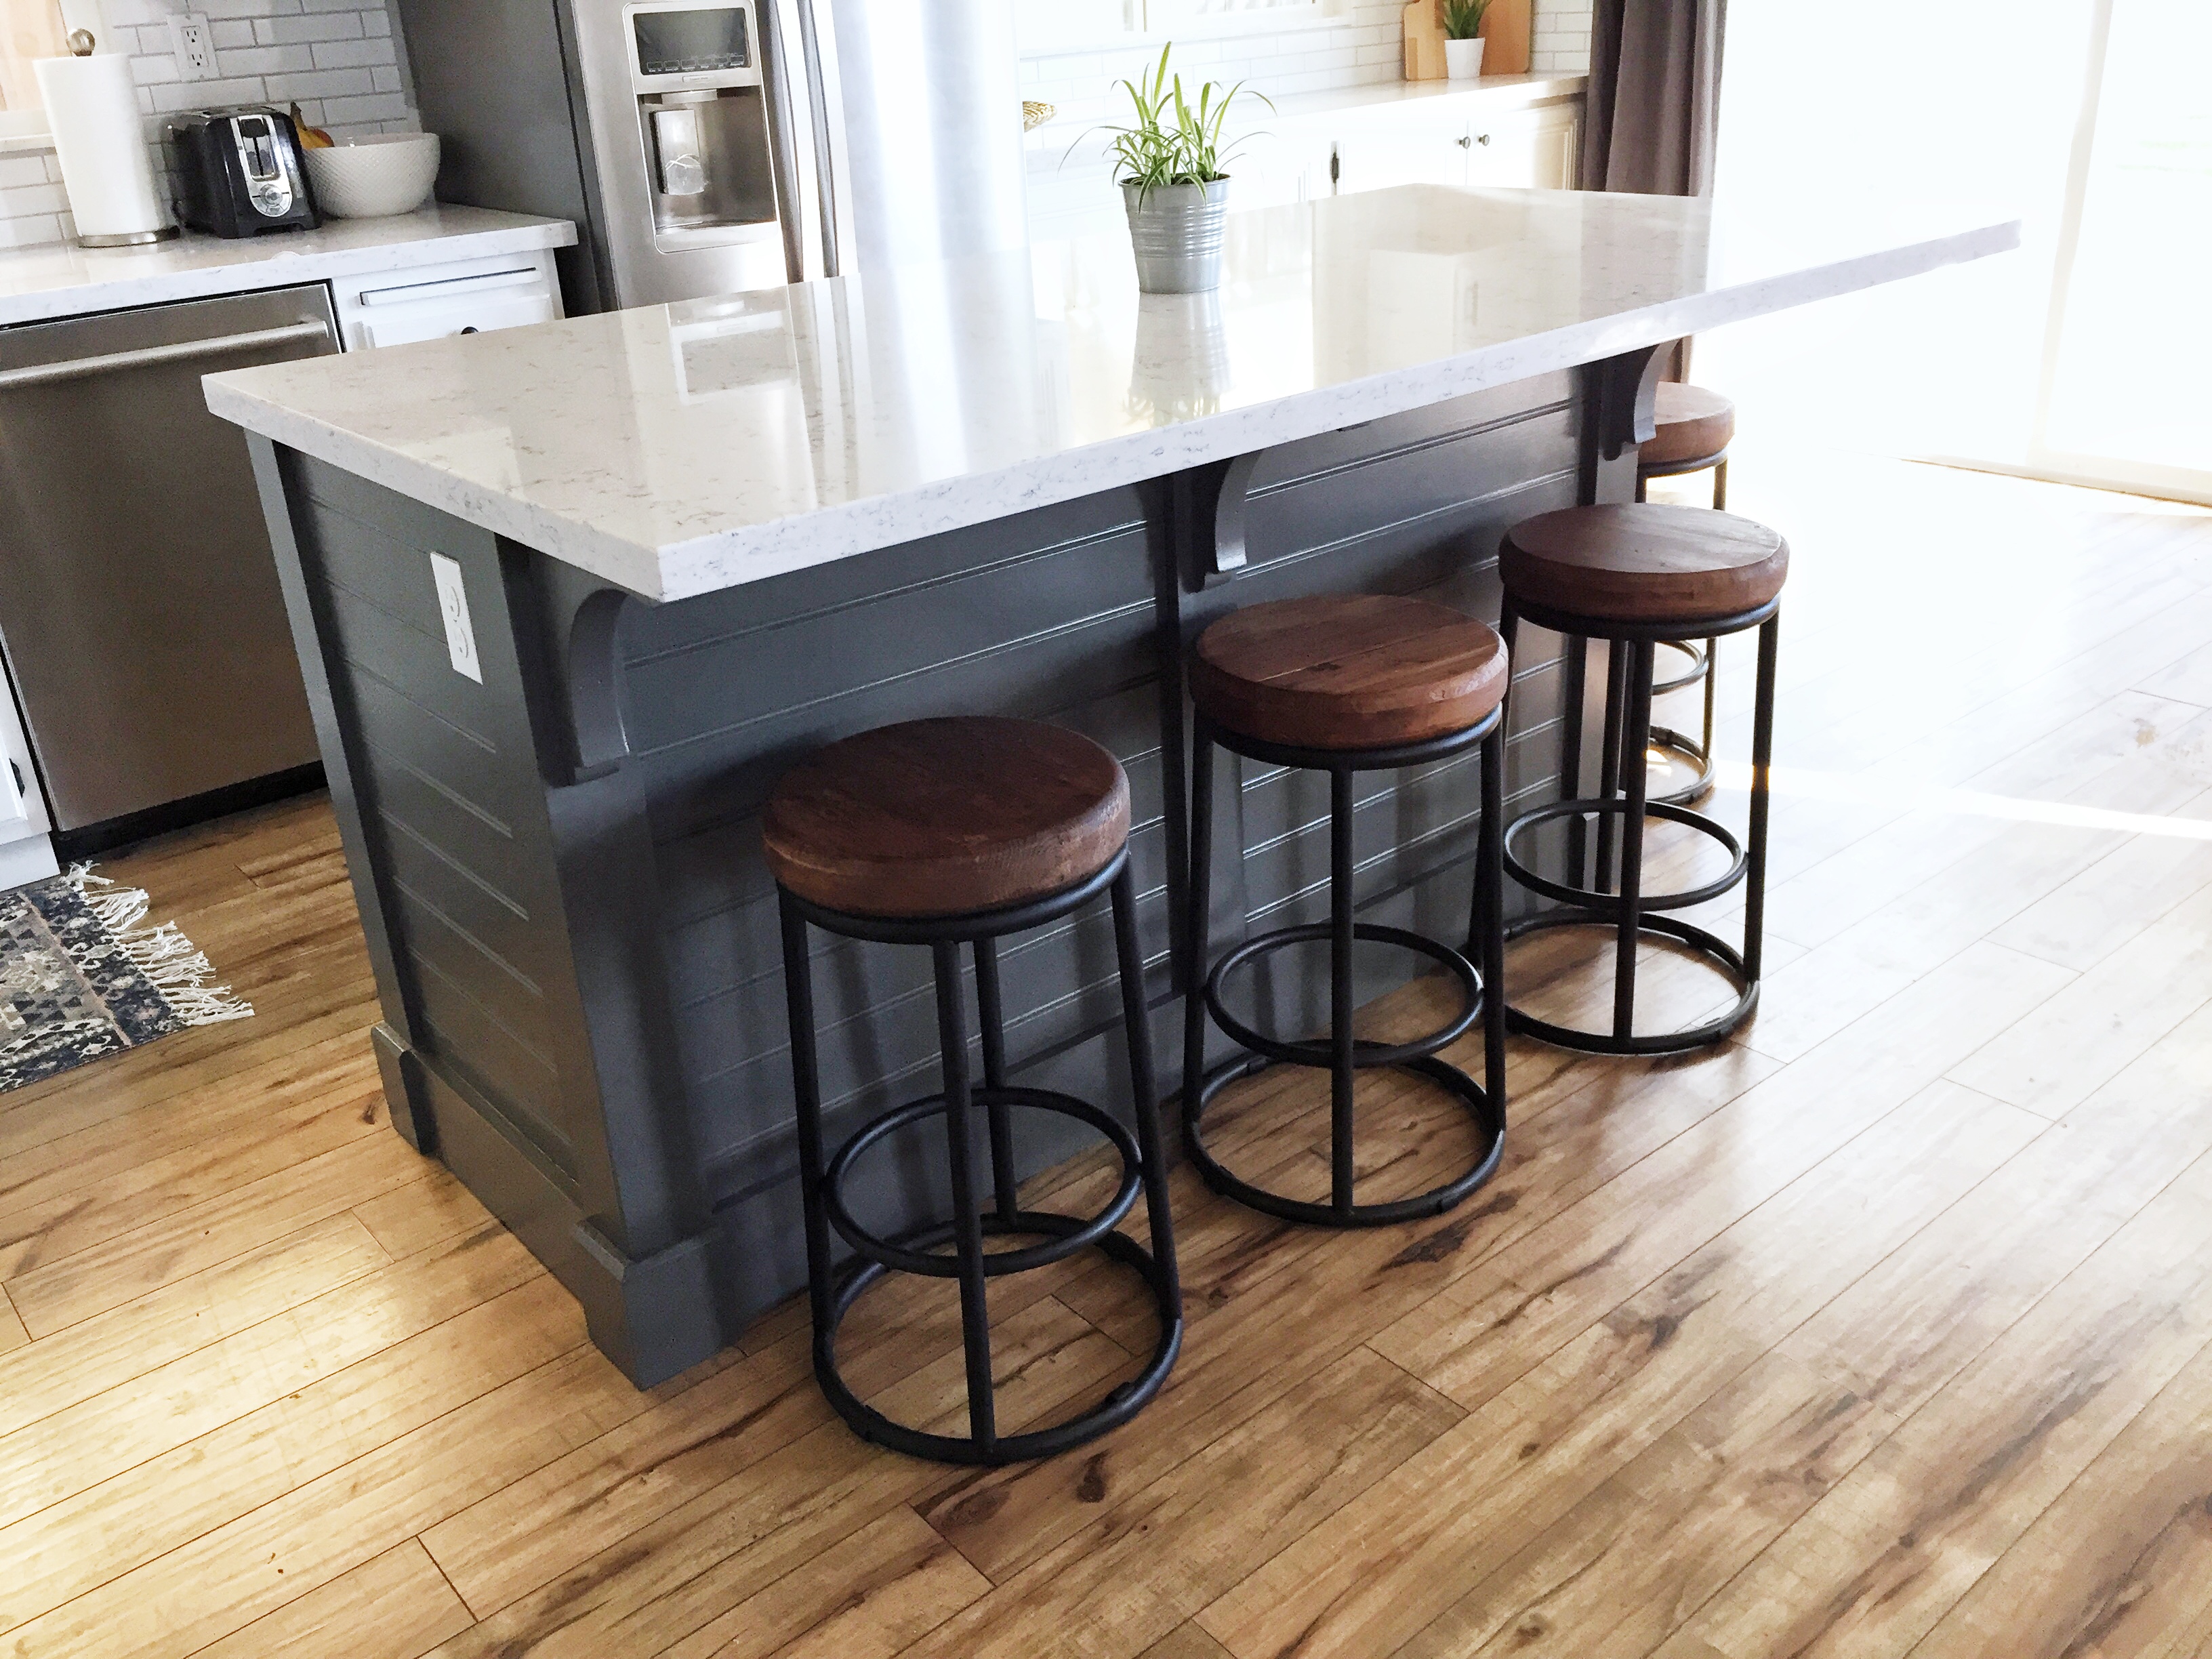 kitchen islands with a bar